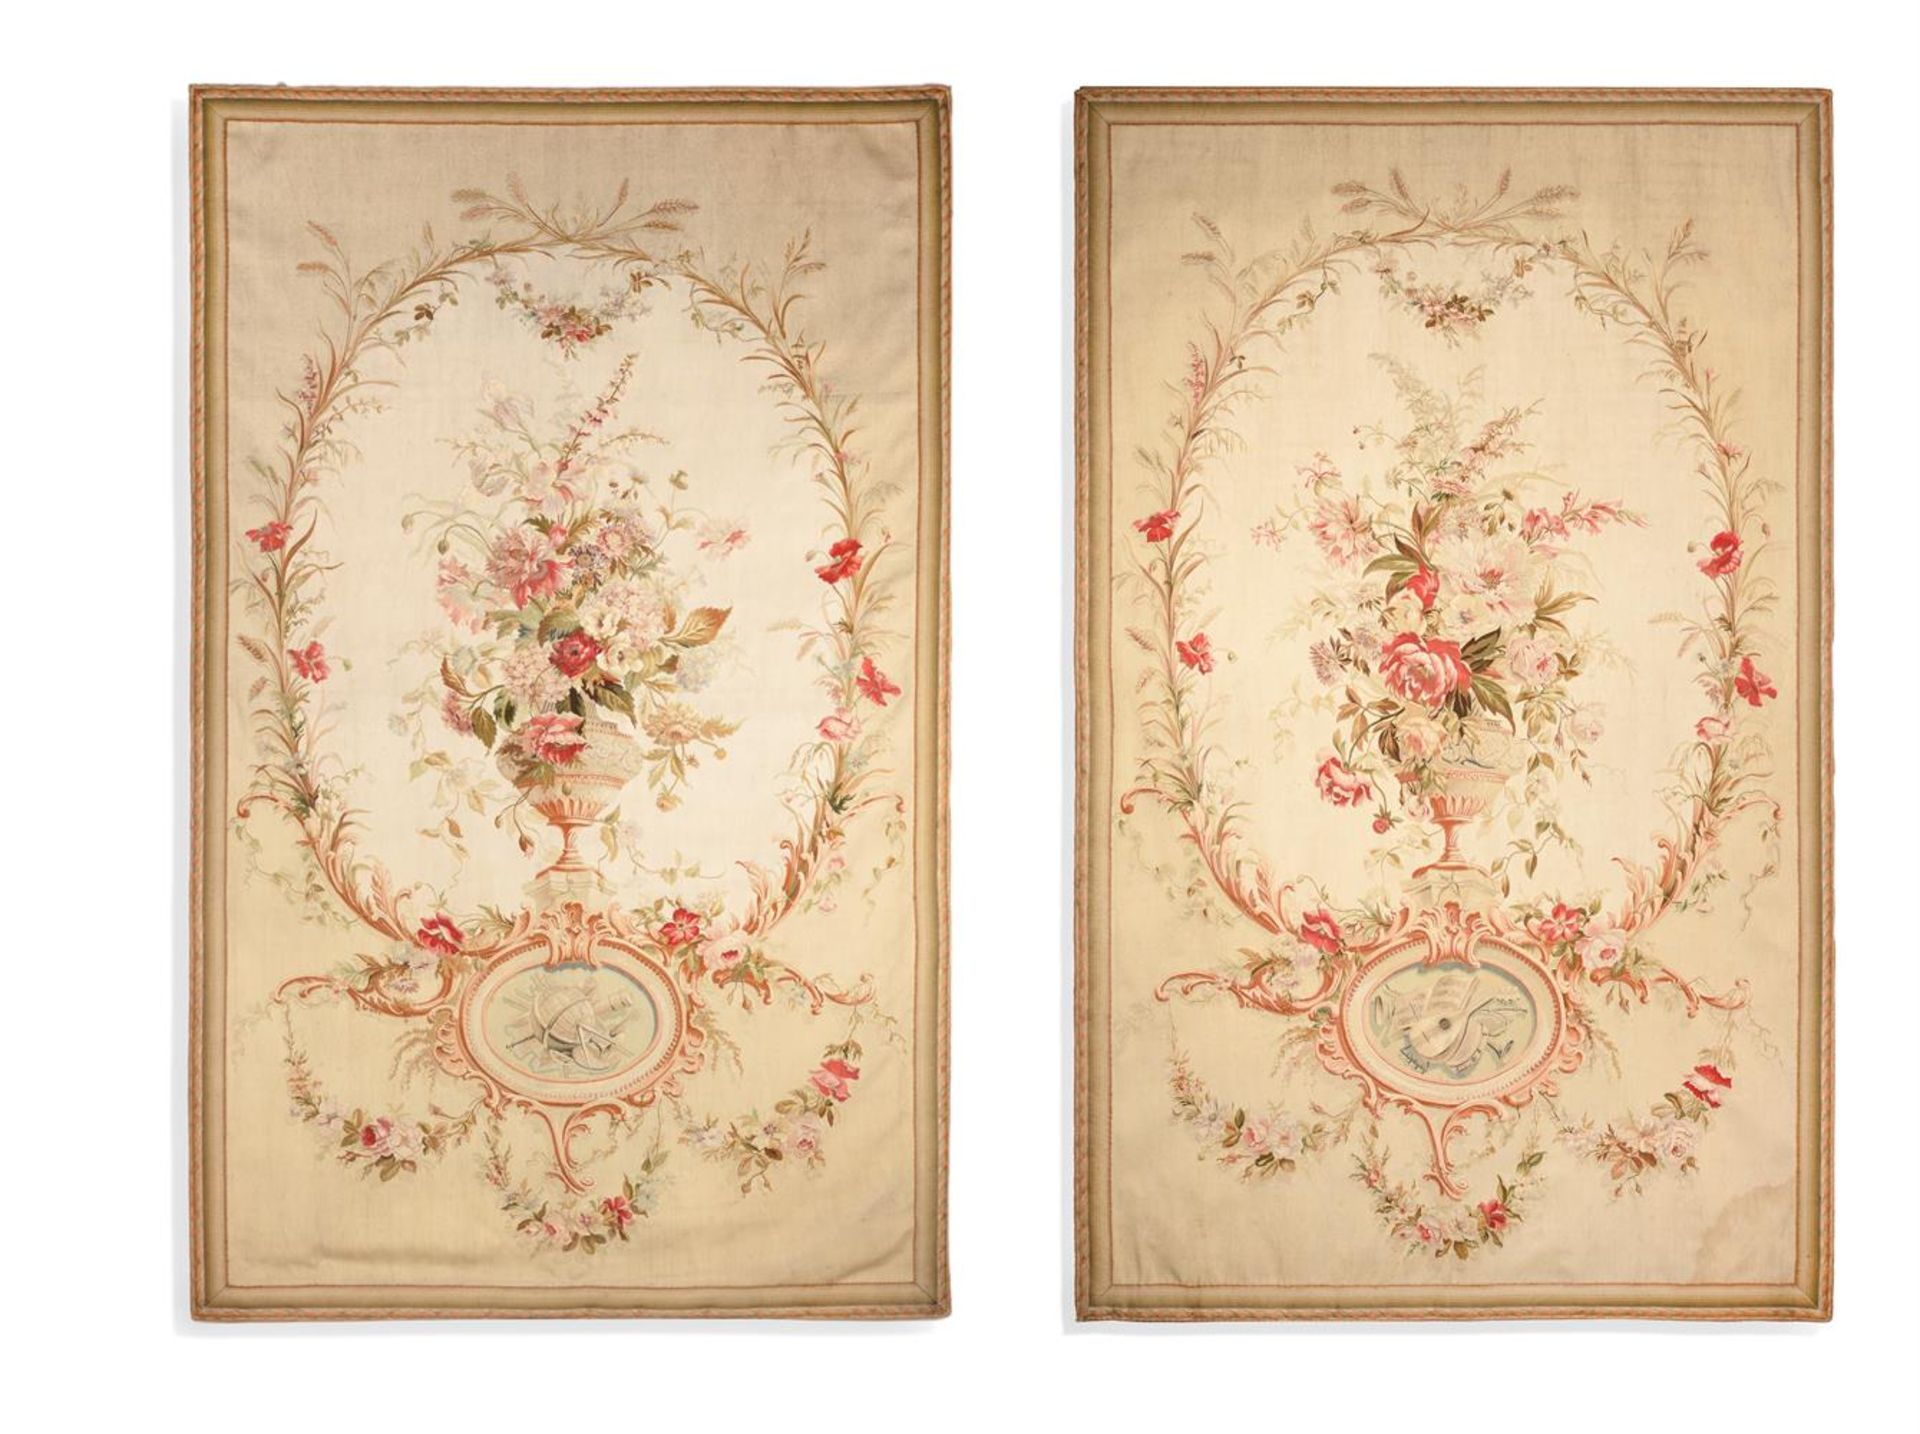 A PAIR OF AUBUSSON TAPESTRY PANELS, 19TH CENTURY